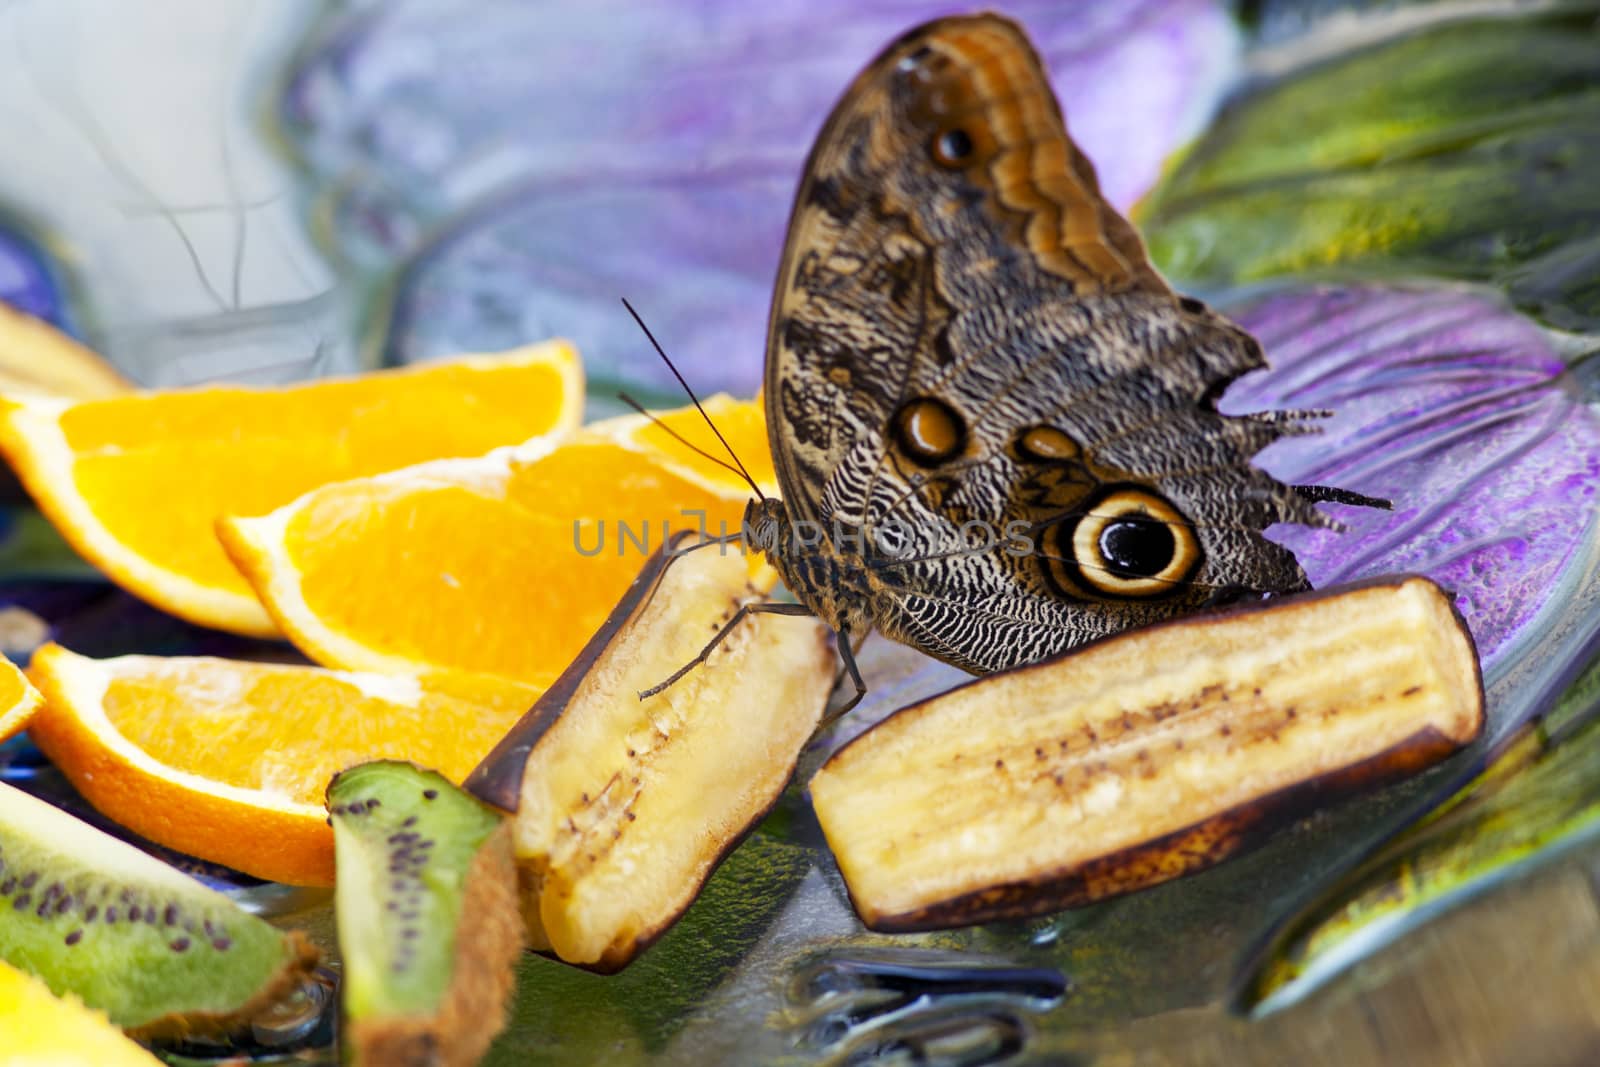 An Owl Butterfly feeding on banana and other fruit.